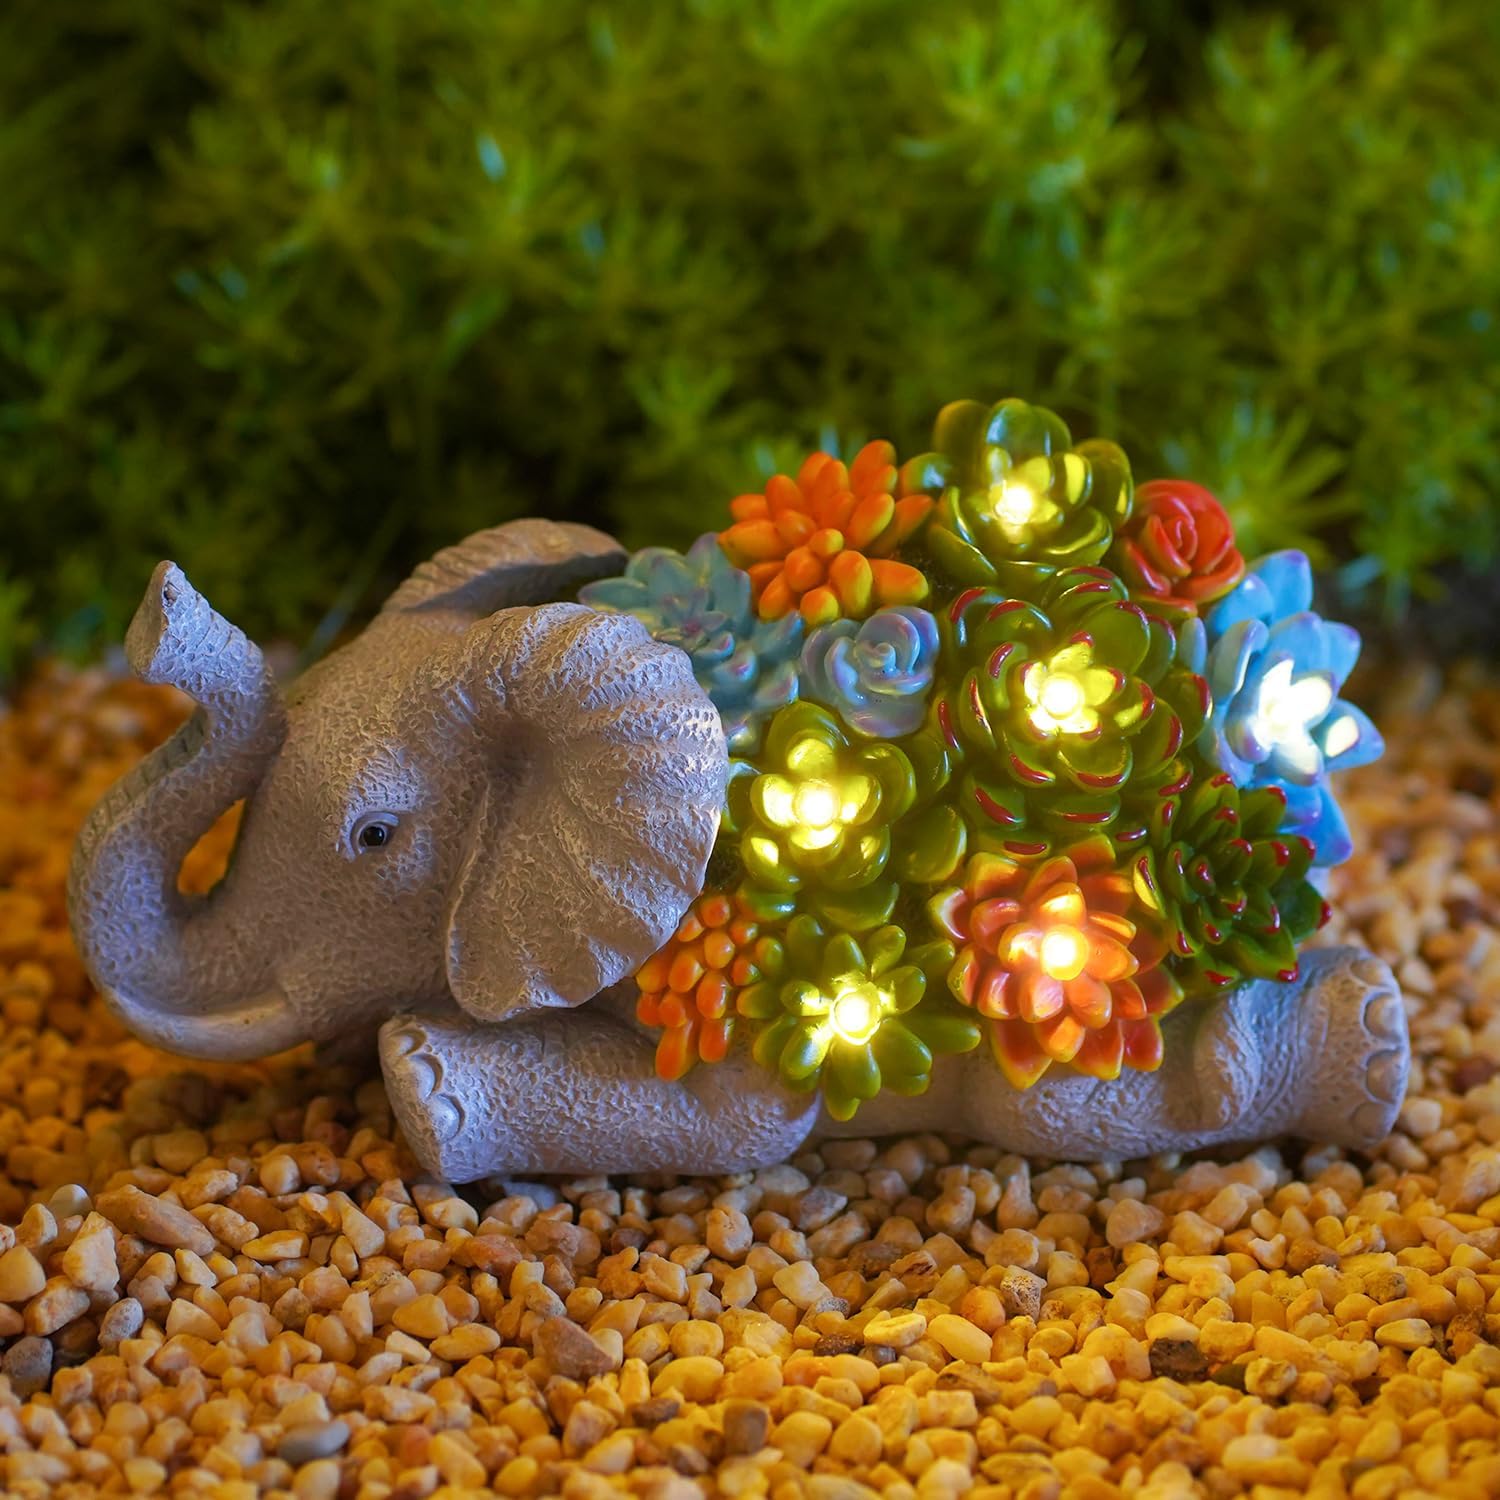 Elephant Statue Solar Garden Ornaments Outdoor Decor Waterproof Resin Elephant Figurines with Succulent 6 LED Solar Lights decoration for Home Yard Patio Lawn Elephant gifts for Women/Mum/Christmas 2